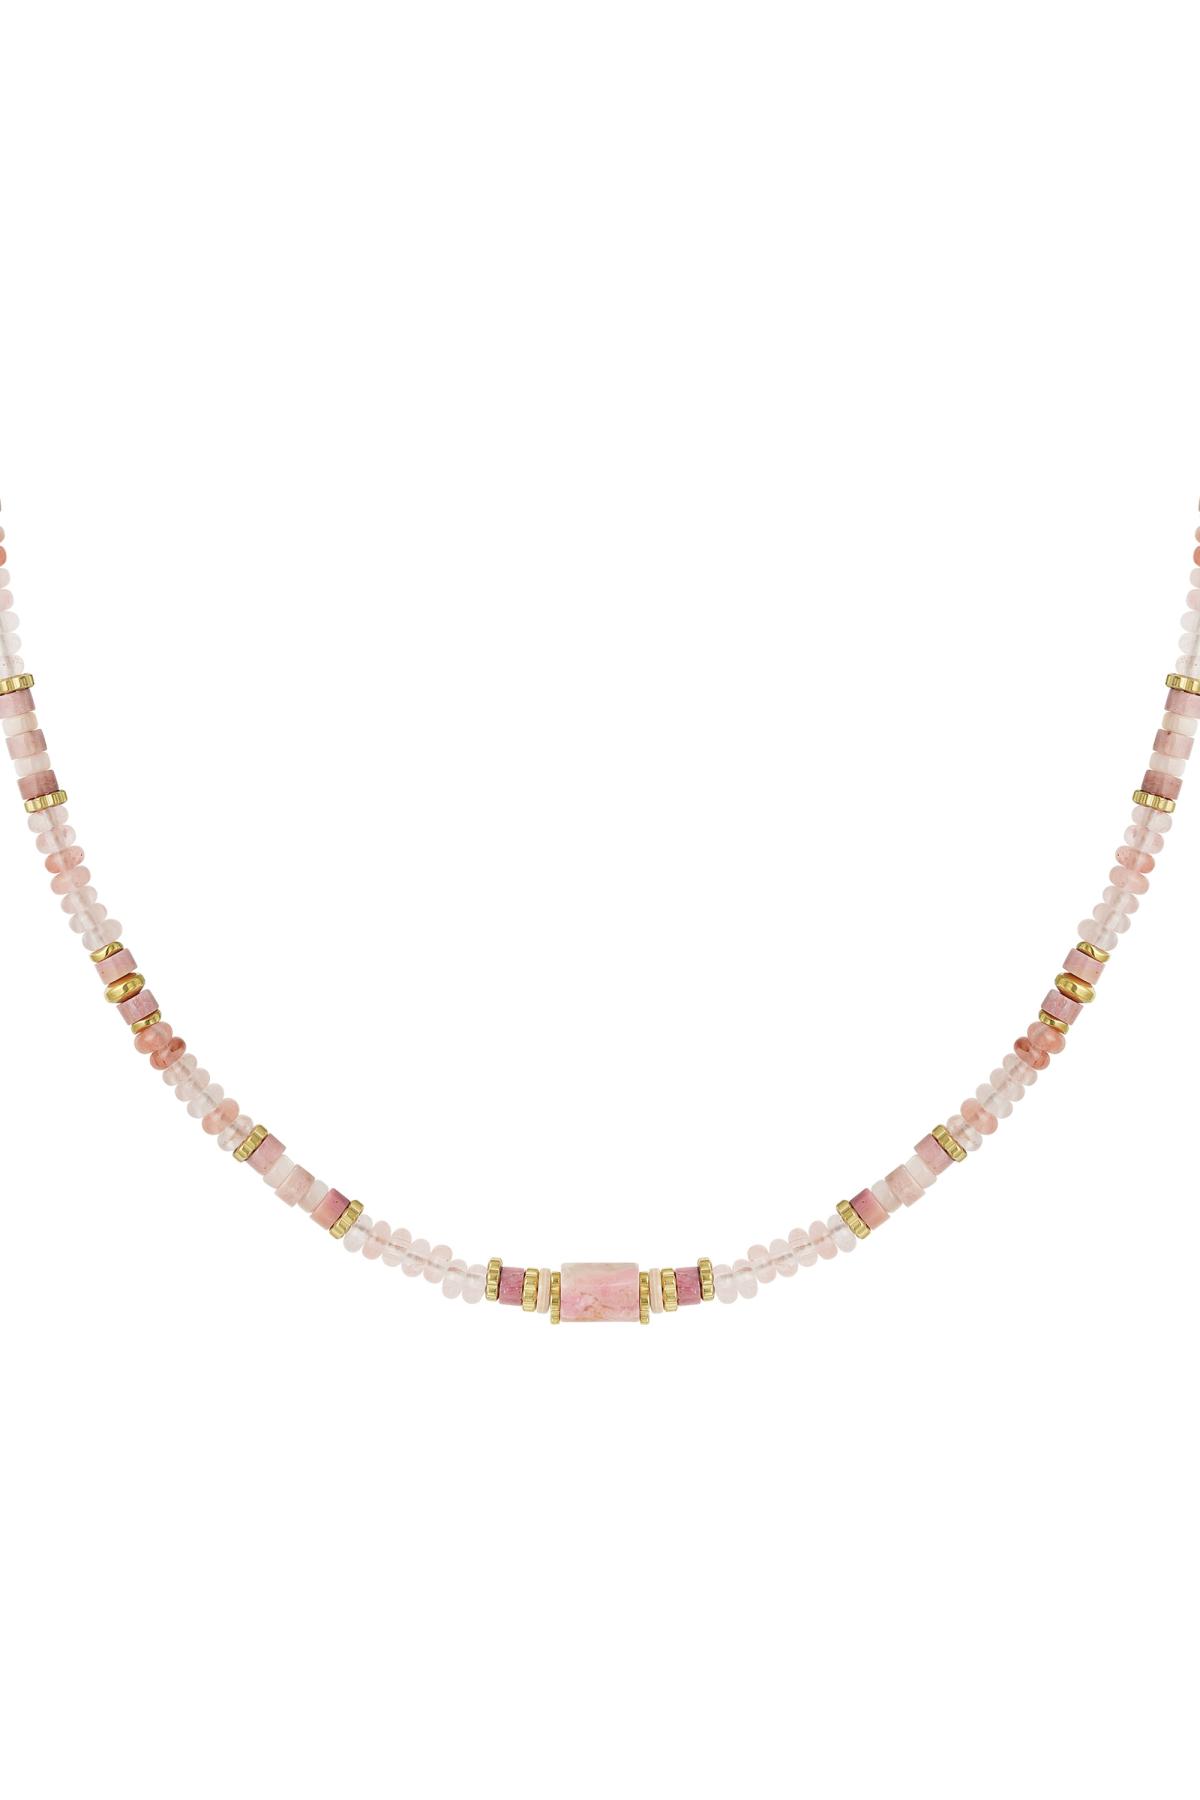 Collana perline party - Collezione Pietre Naturali Pink & Gold Stainless Steel h5 